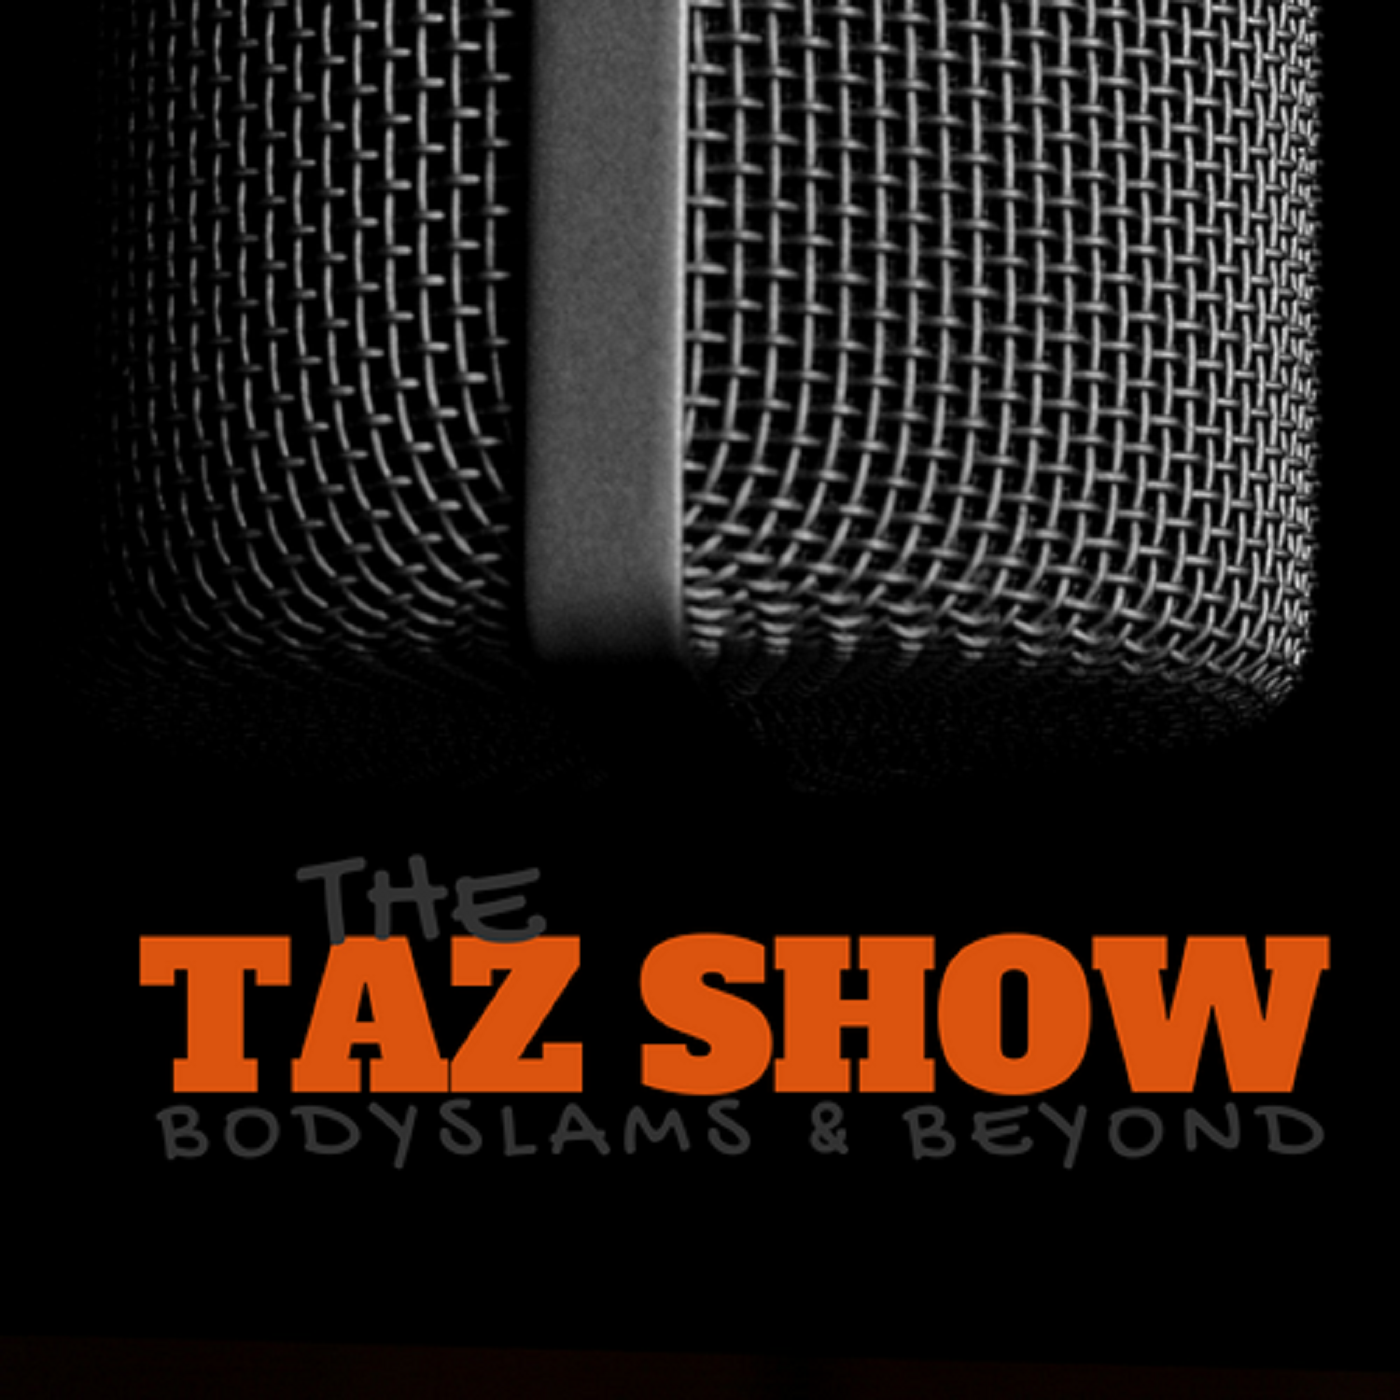 The Taz Show welcomes the King of Dong Style, Joey Ryan! Mike Tenay also stops by, as well as an NXT review.